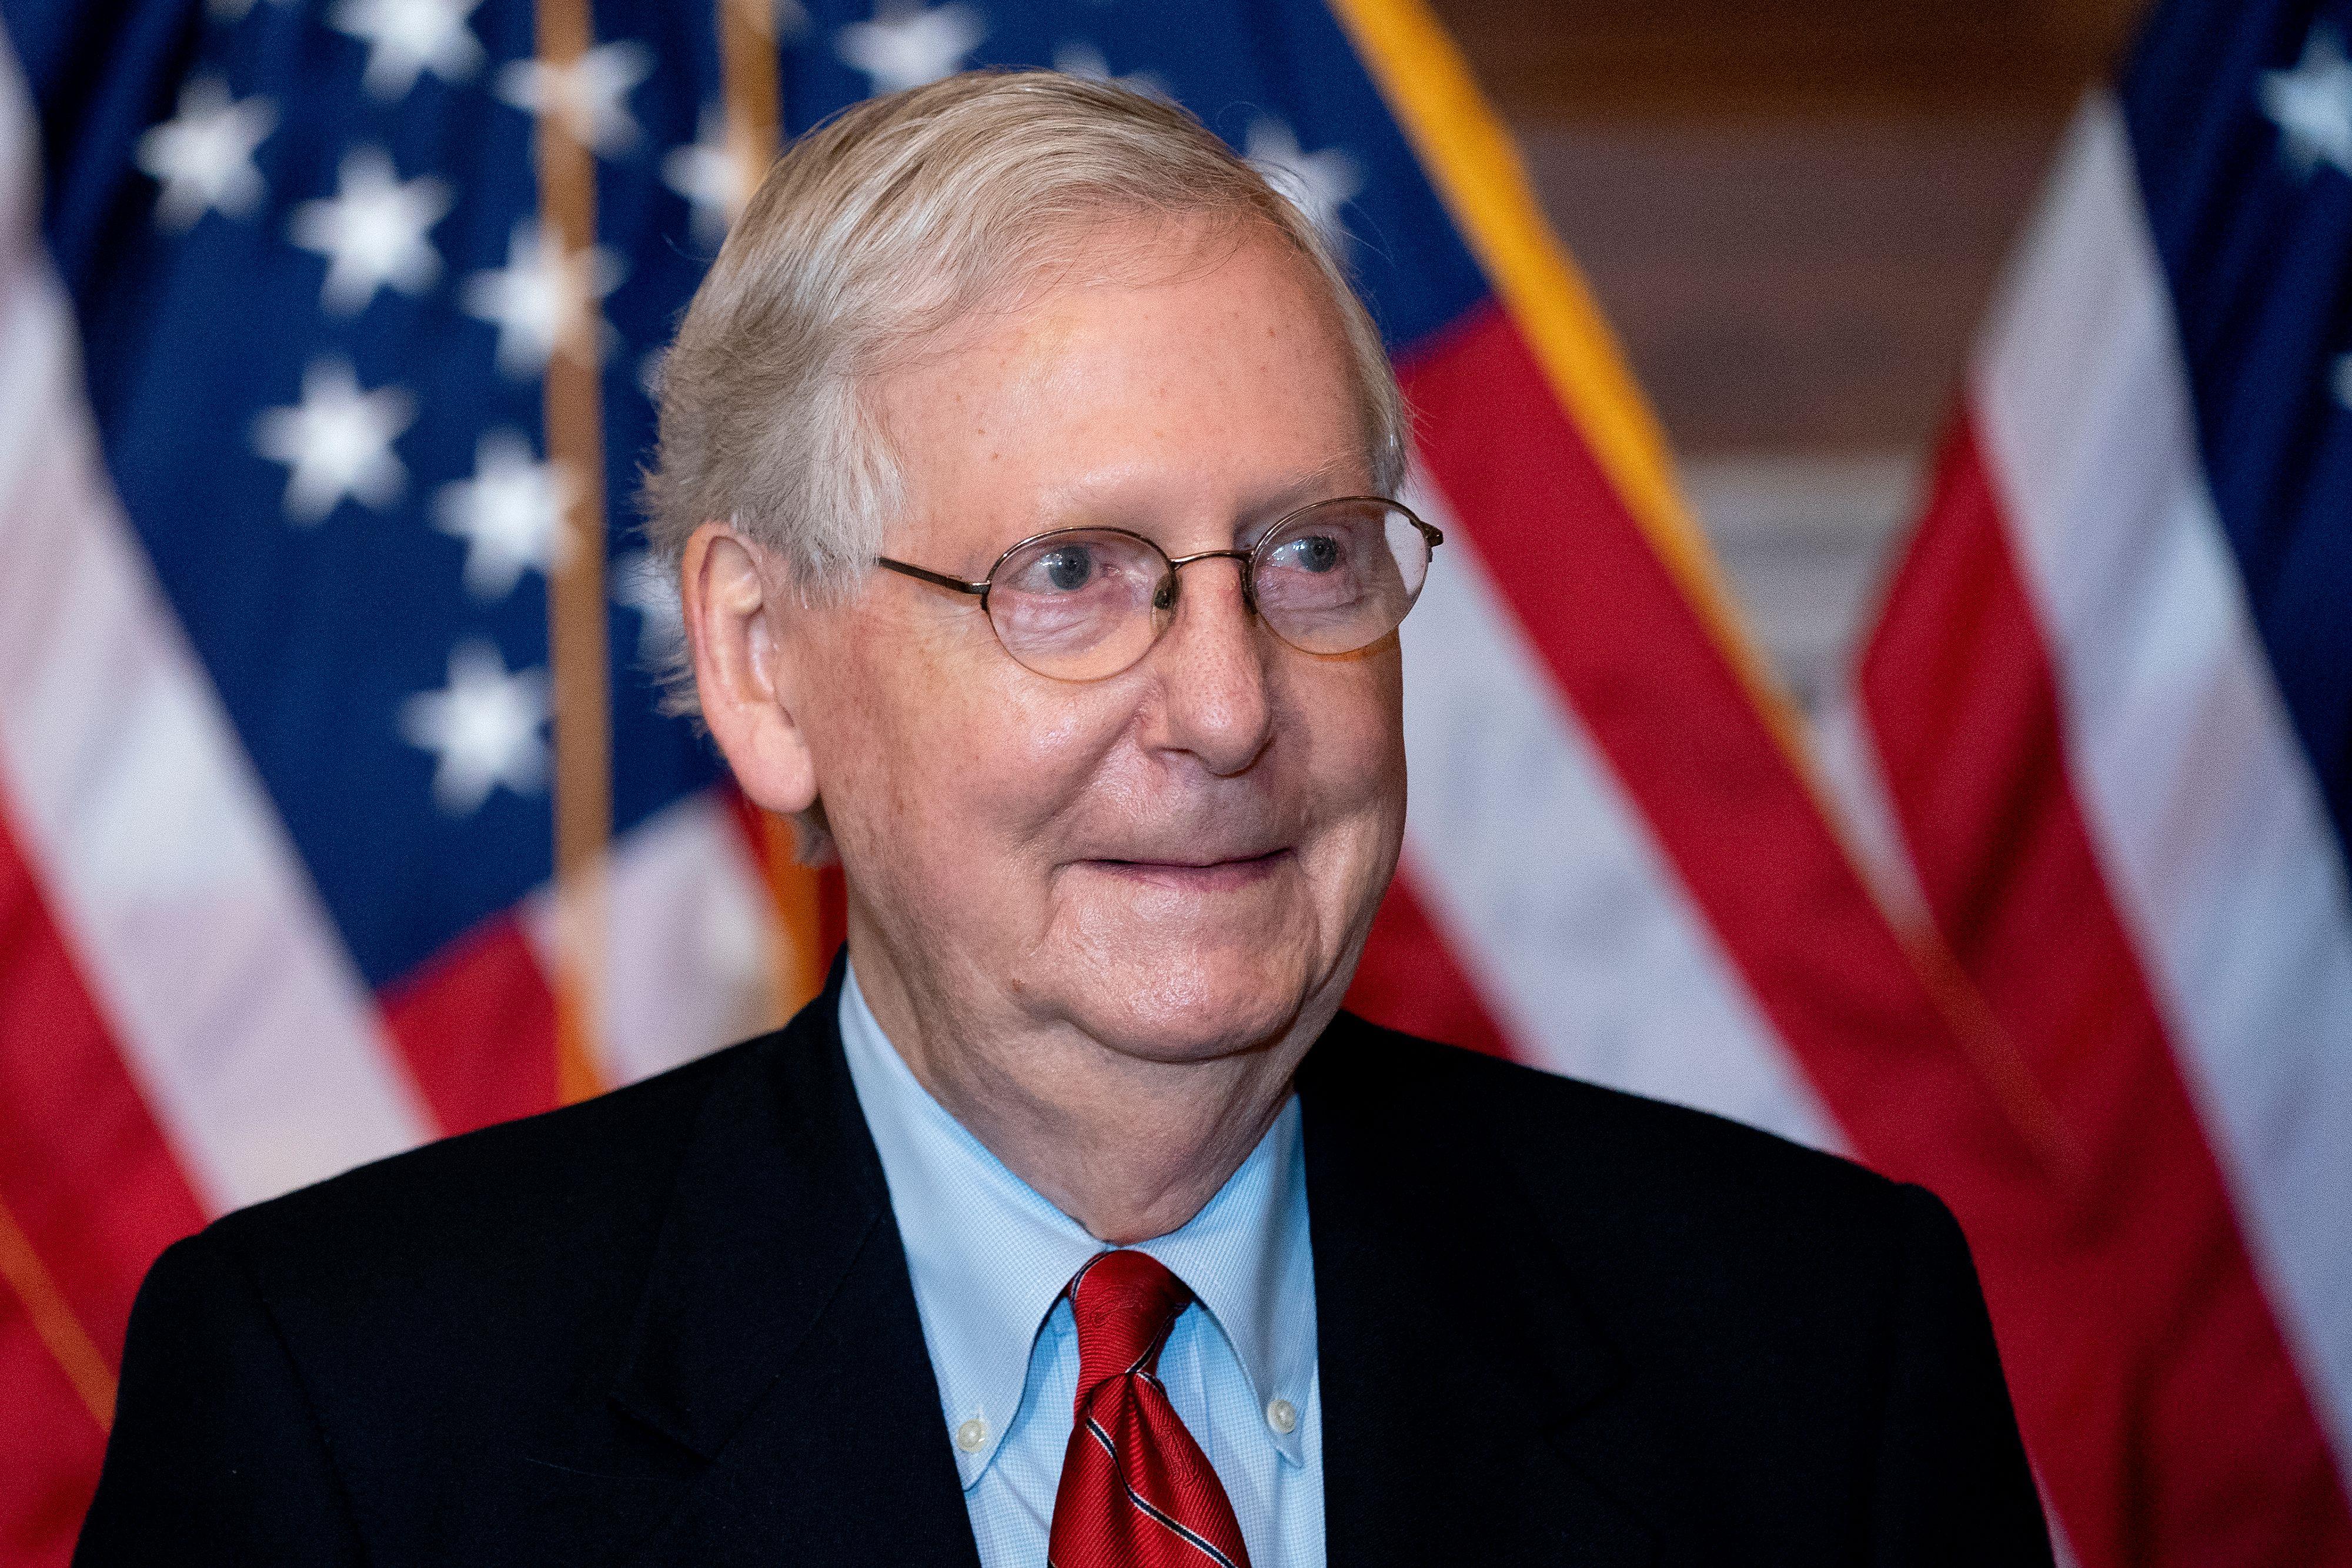 Mitch McConnell makes a closed-mouth smile in front of U.S. flags.